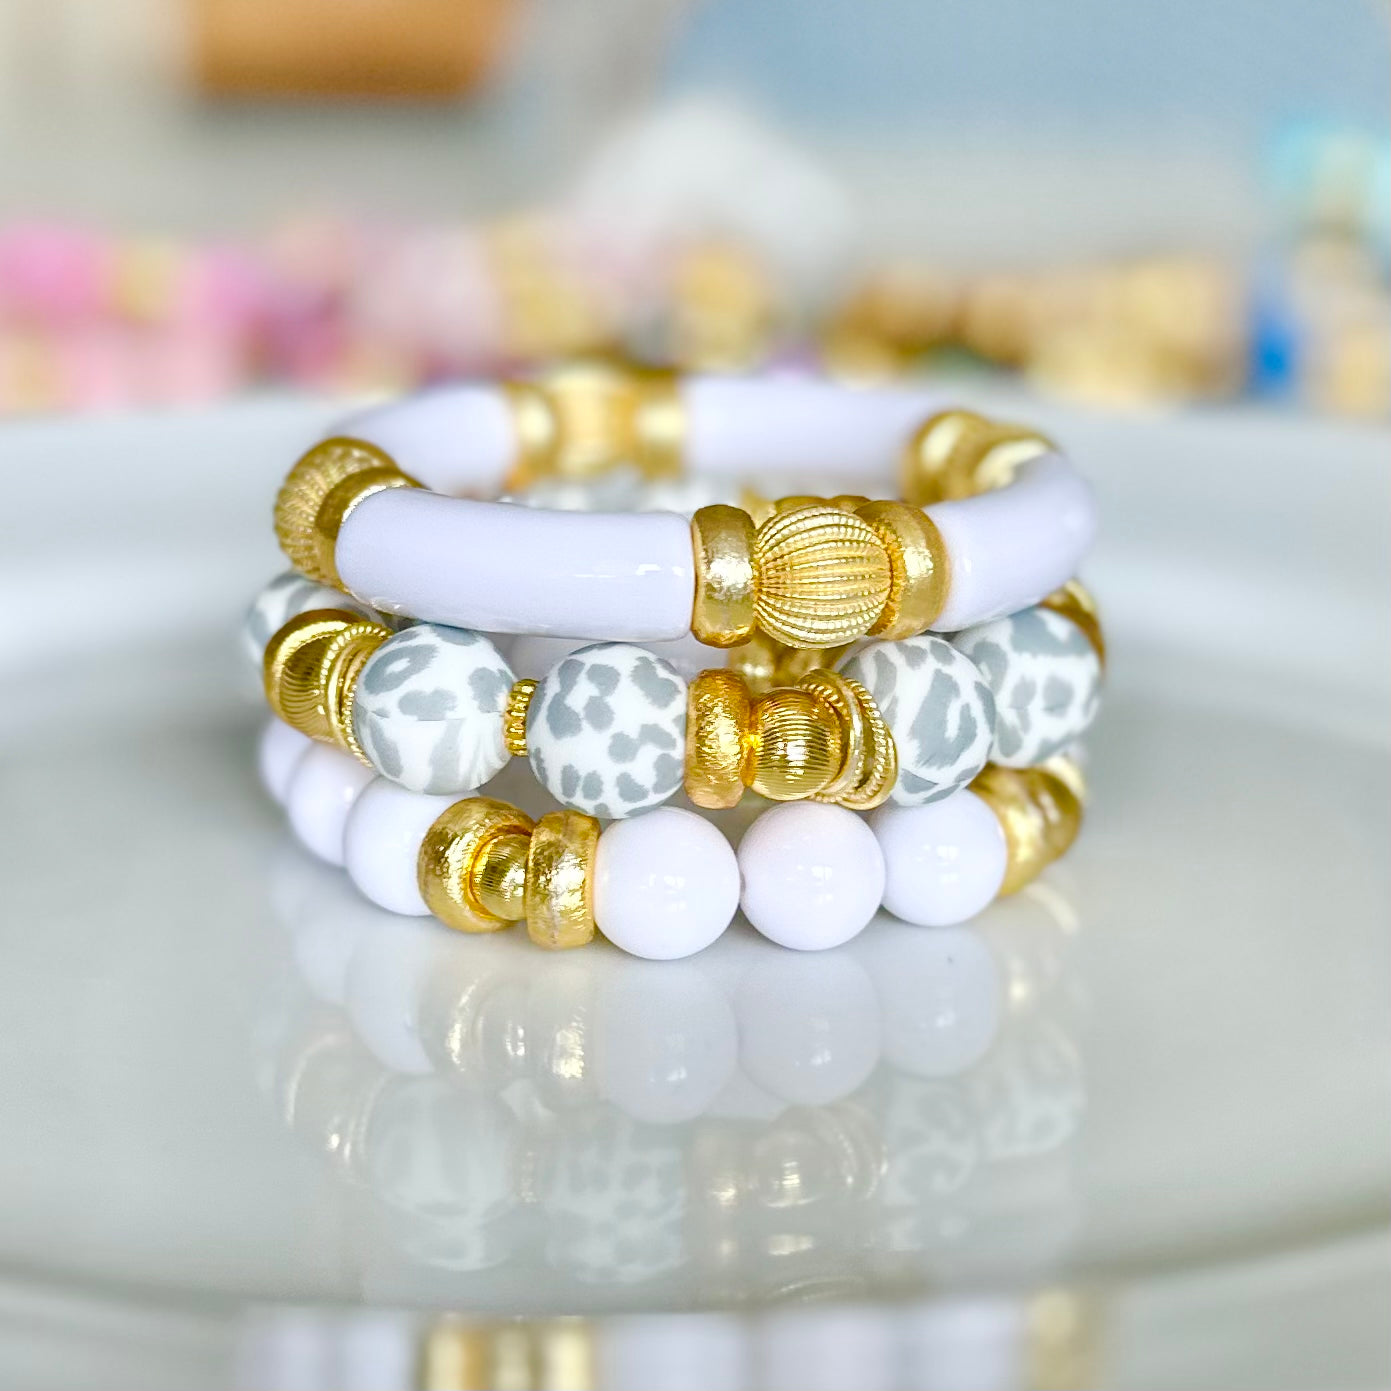 BRIGHT WHITE BANGLE WITH GOLD ACCENTS